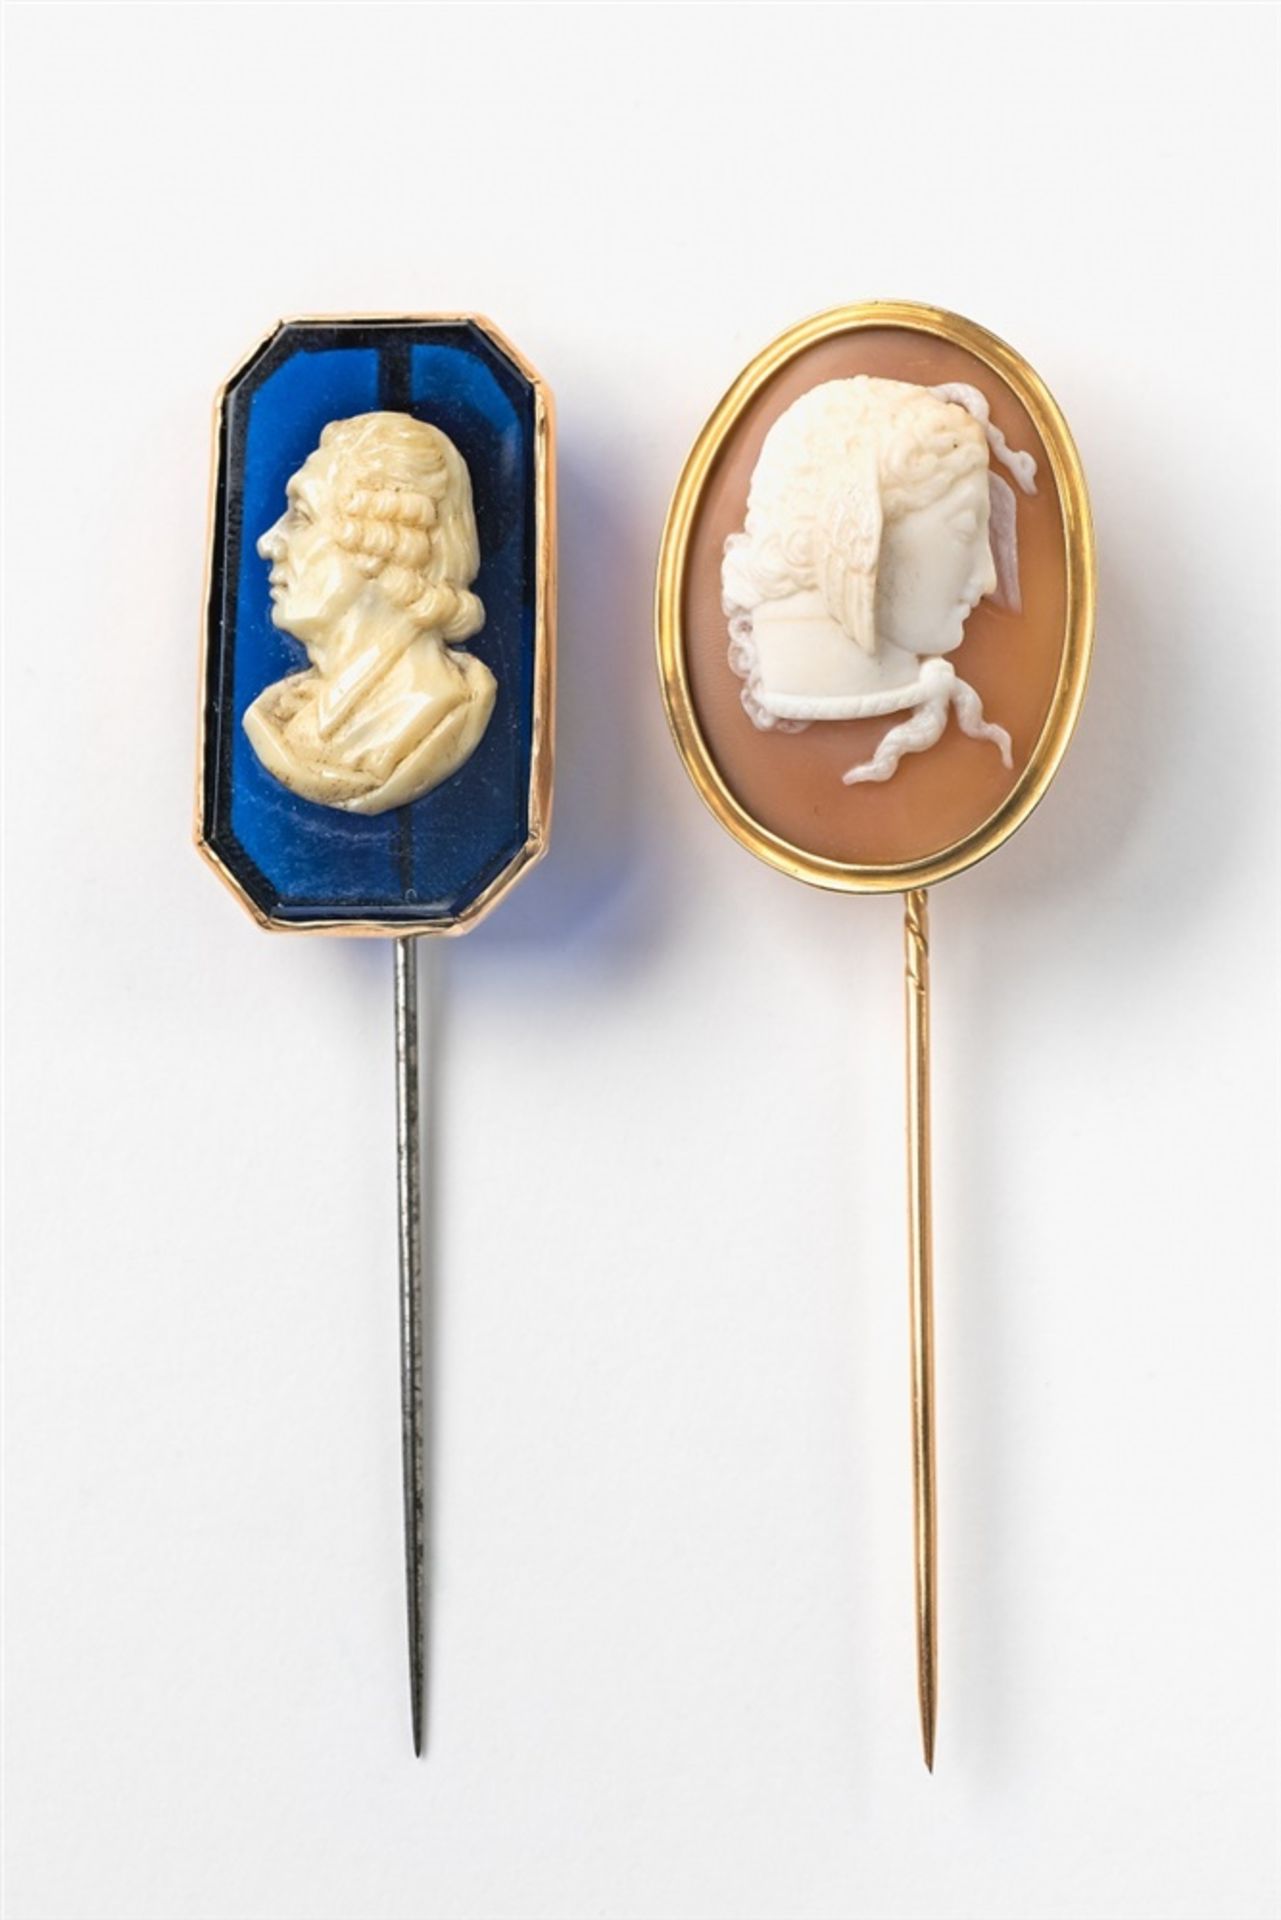 Two cameo pins1) Portrait of a man in profile, carved bone on blue glass, steel pin, 3.1 x 1.8 cm,